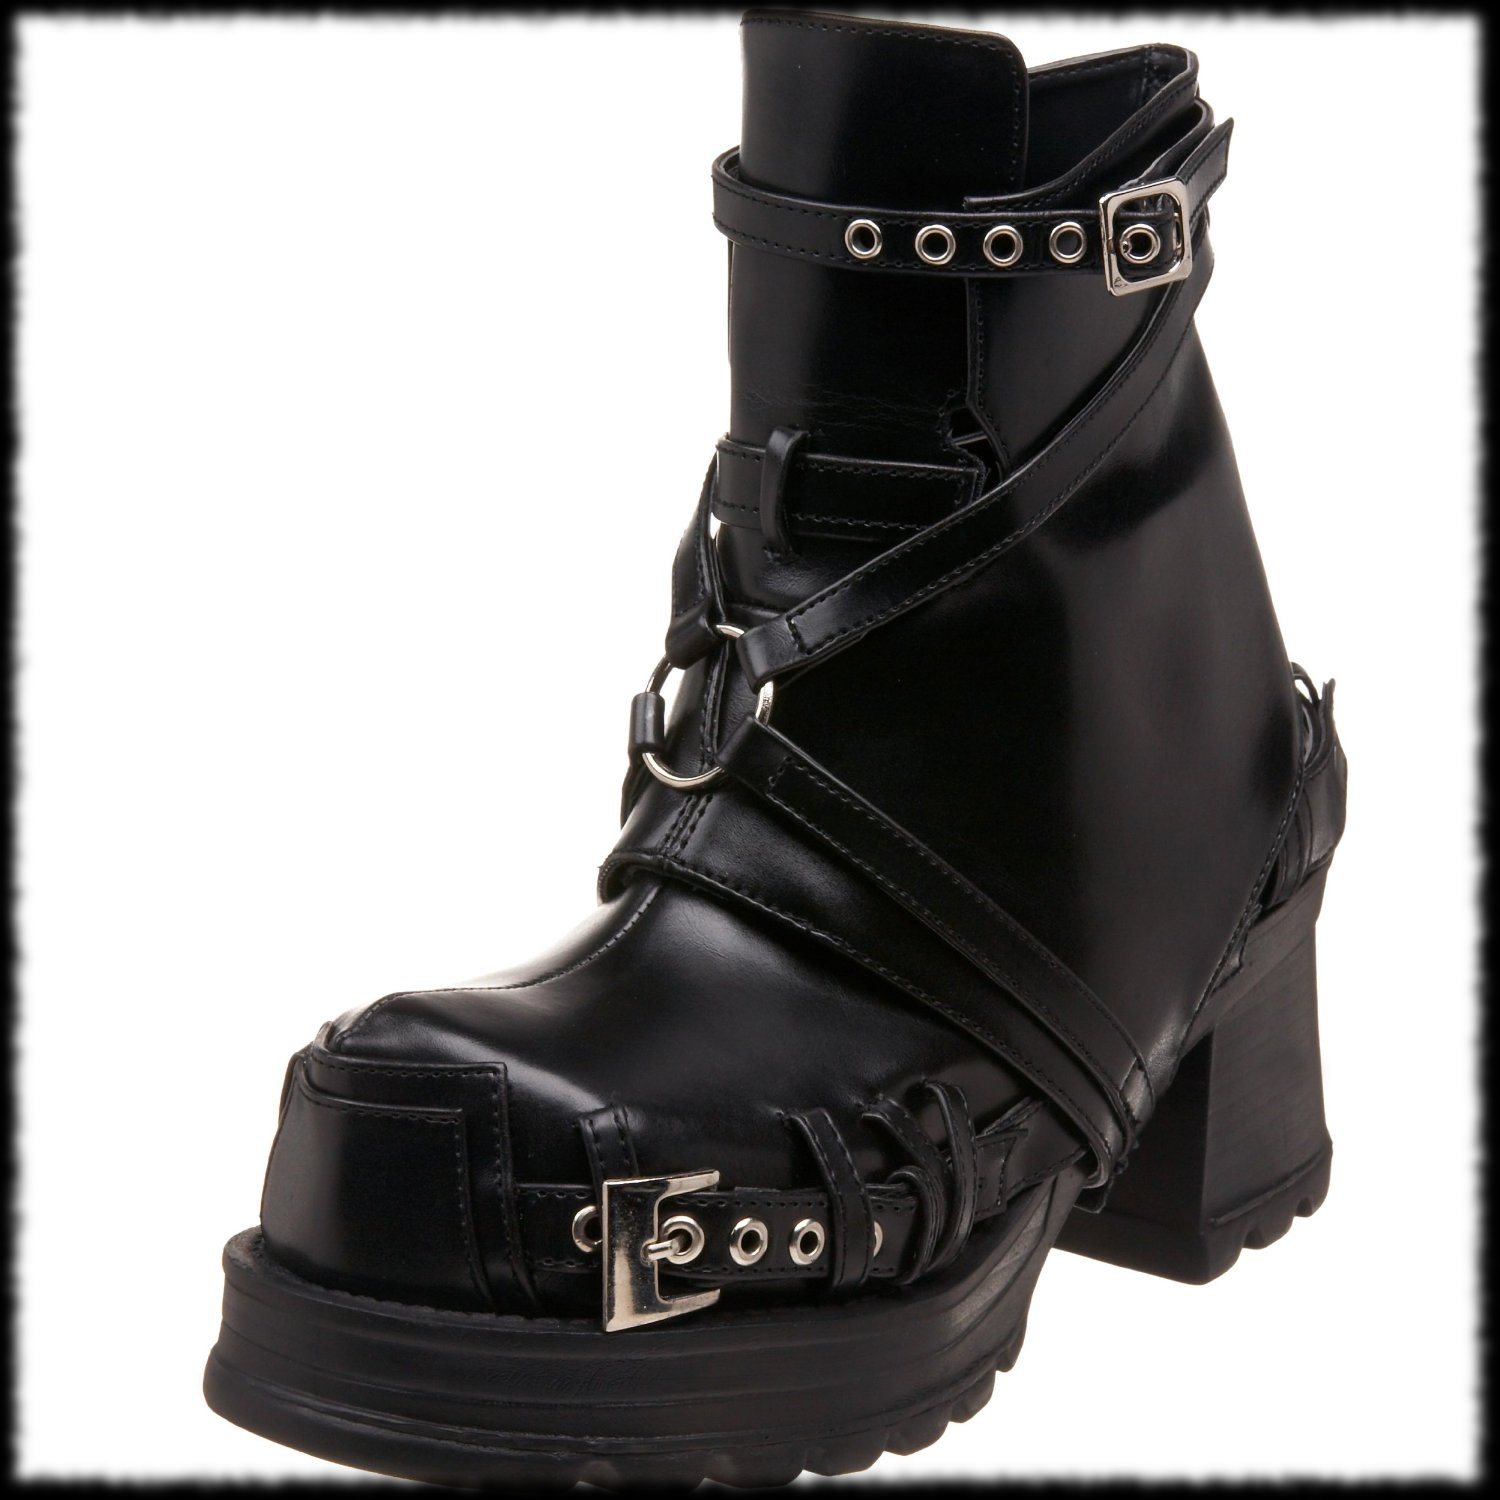 Modern Pirate Boot for Ladies Halloween Costume Ideas